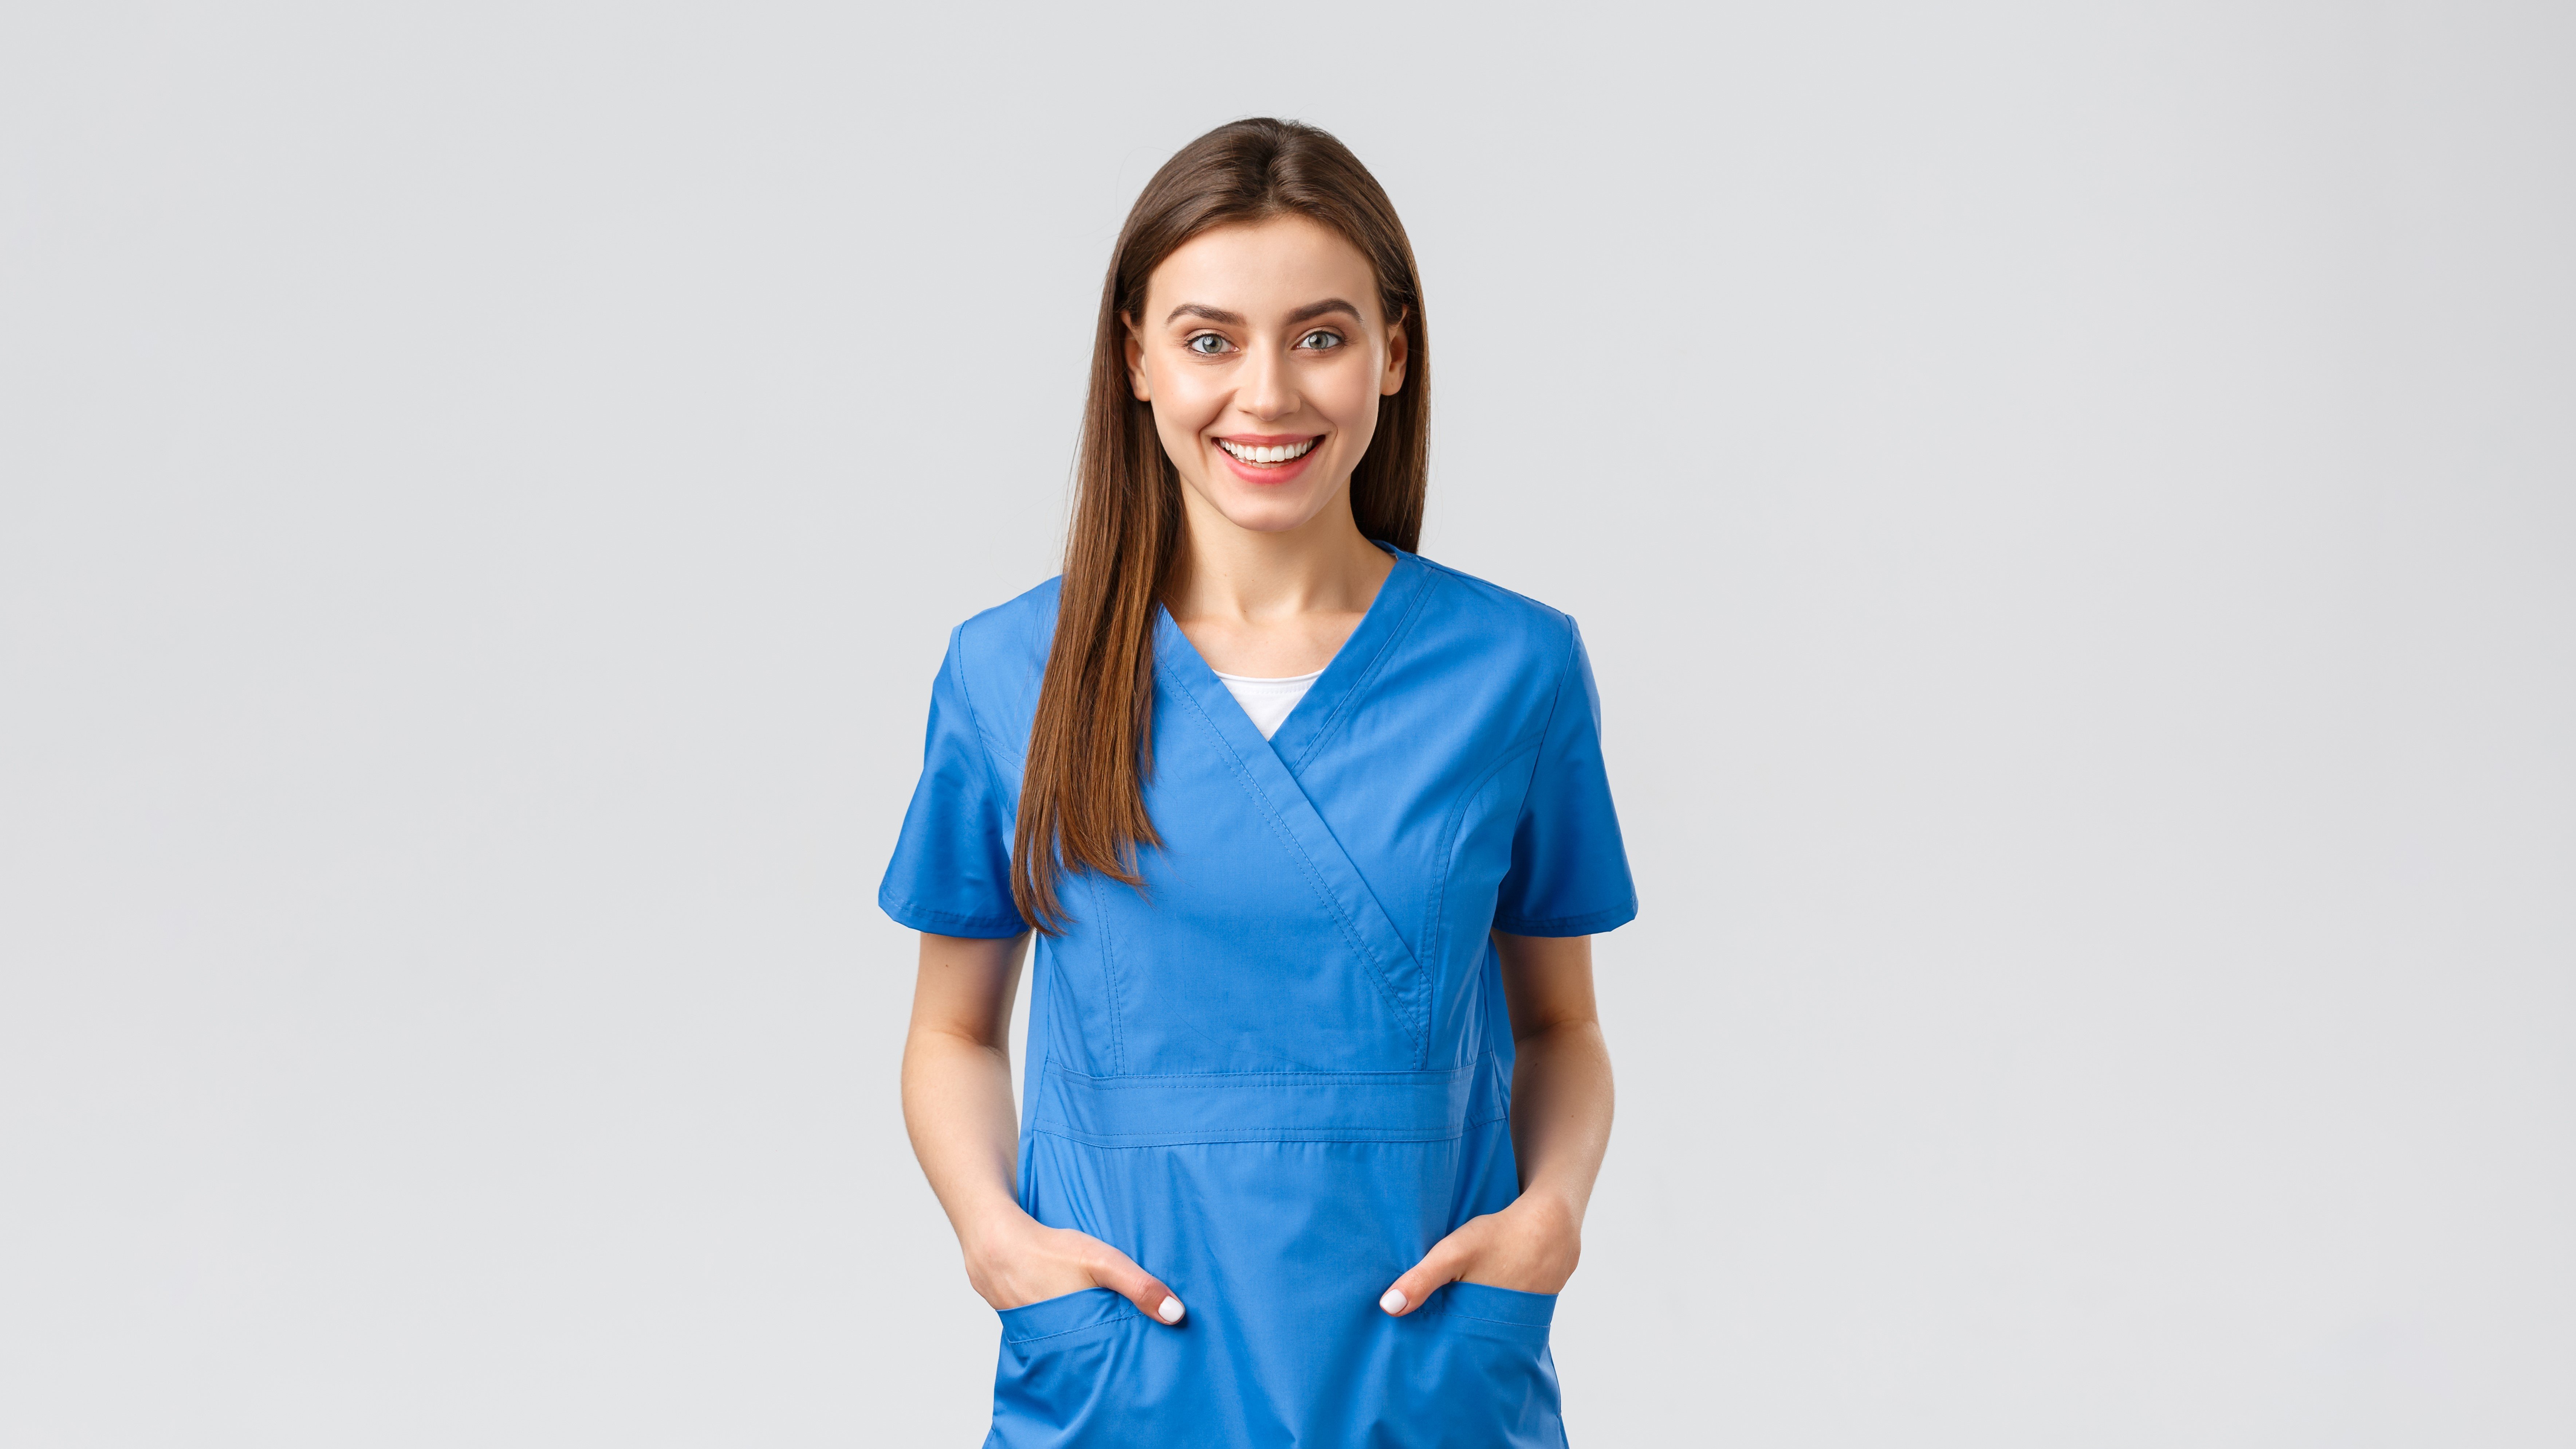 7 Nicklas Stock Image - healthcare-workers-prevent-virus-insurance-medicine-concept-cheerful-smiling-beautiful-doctor-fe